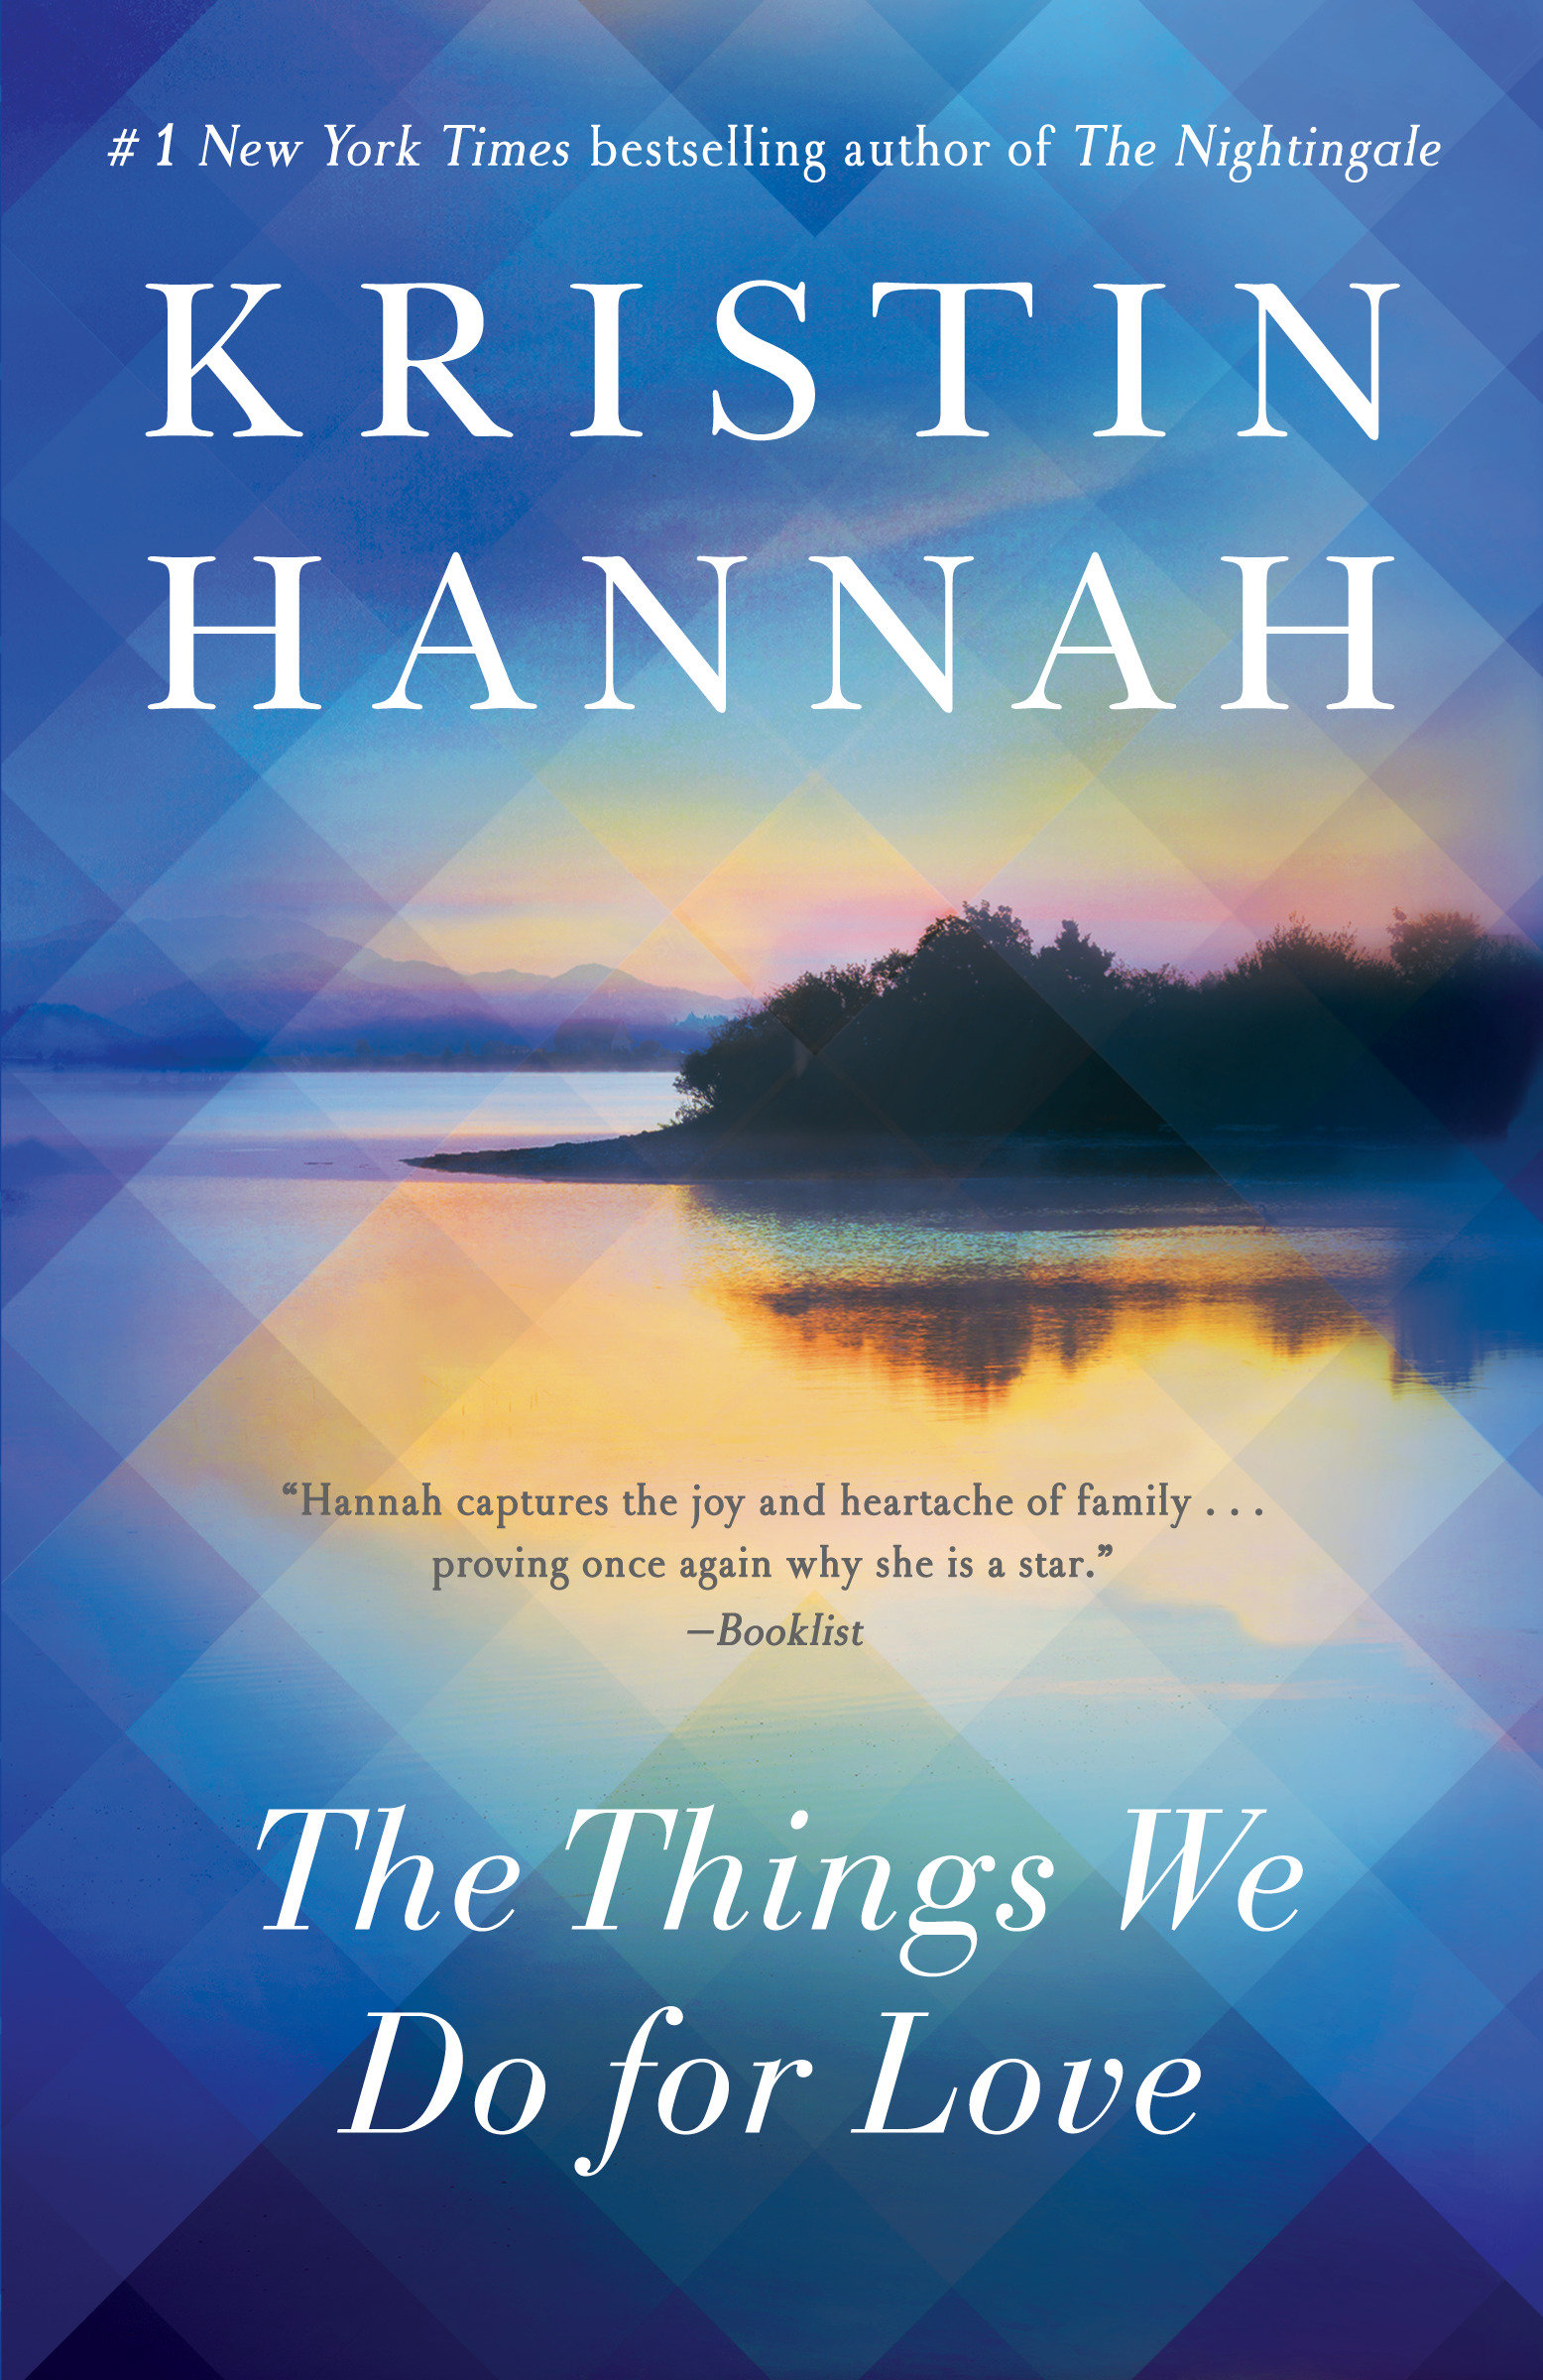 Image de couverture de The Things We Do for Love [electronic resource] : A Novel